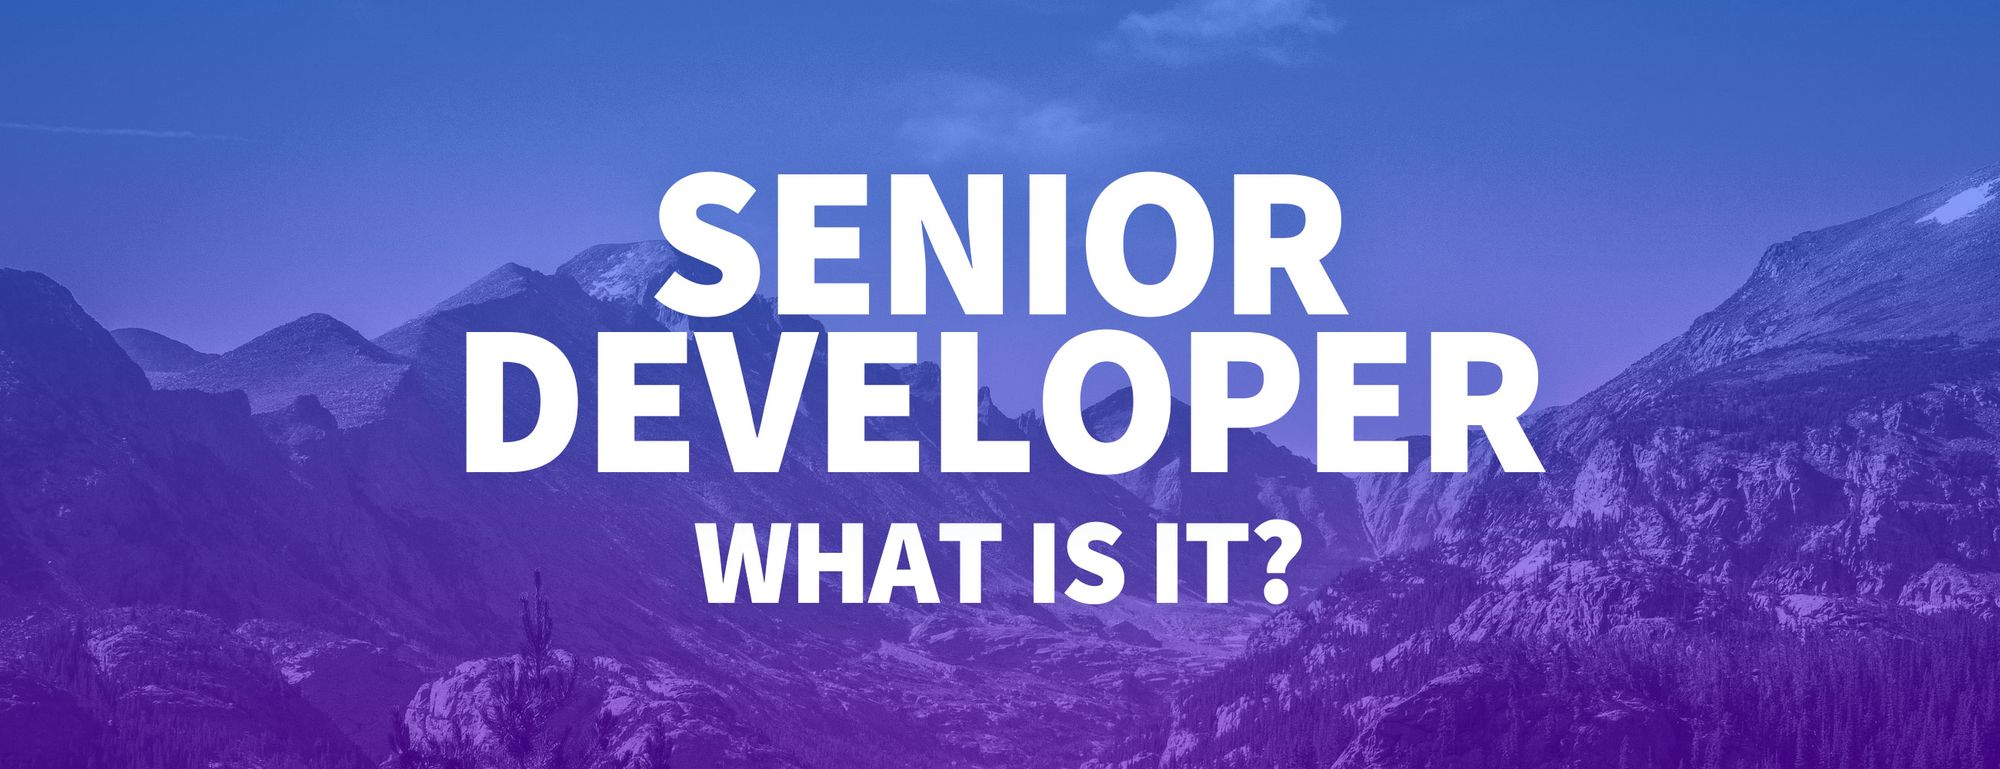 What Is a Senior Developer and How Can I Become One?